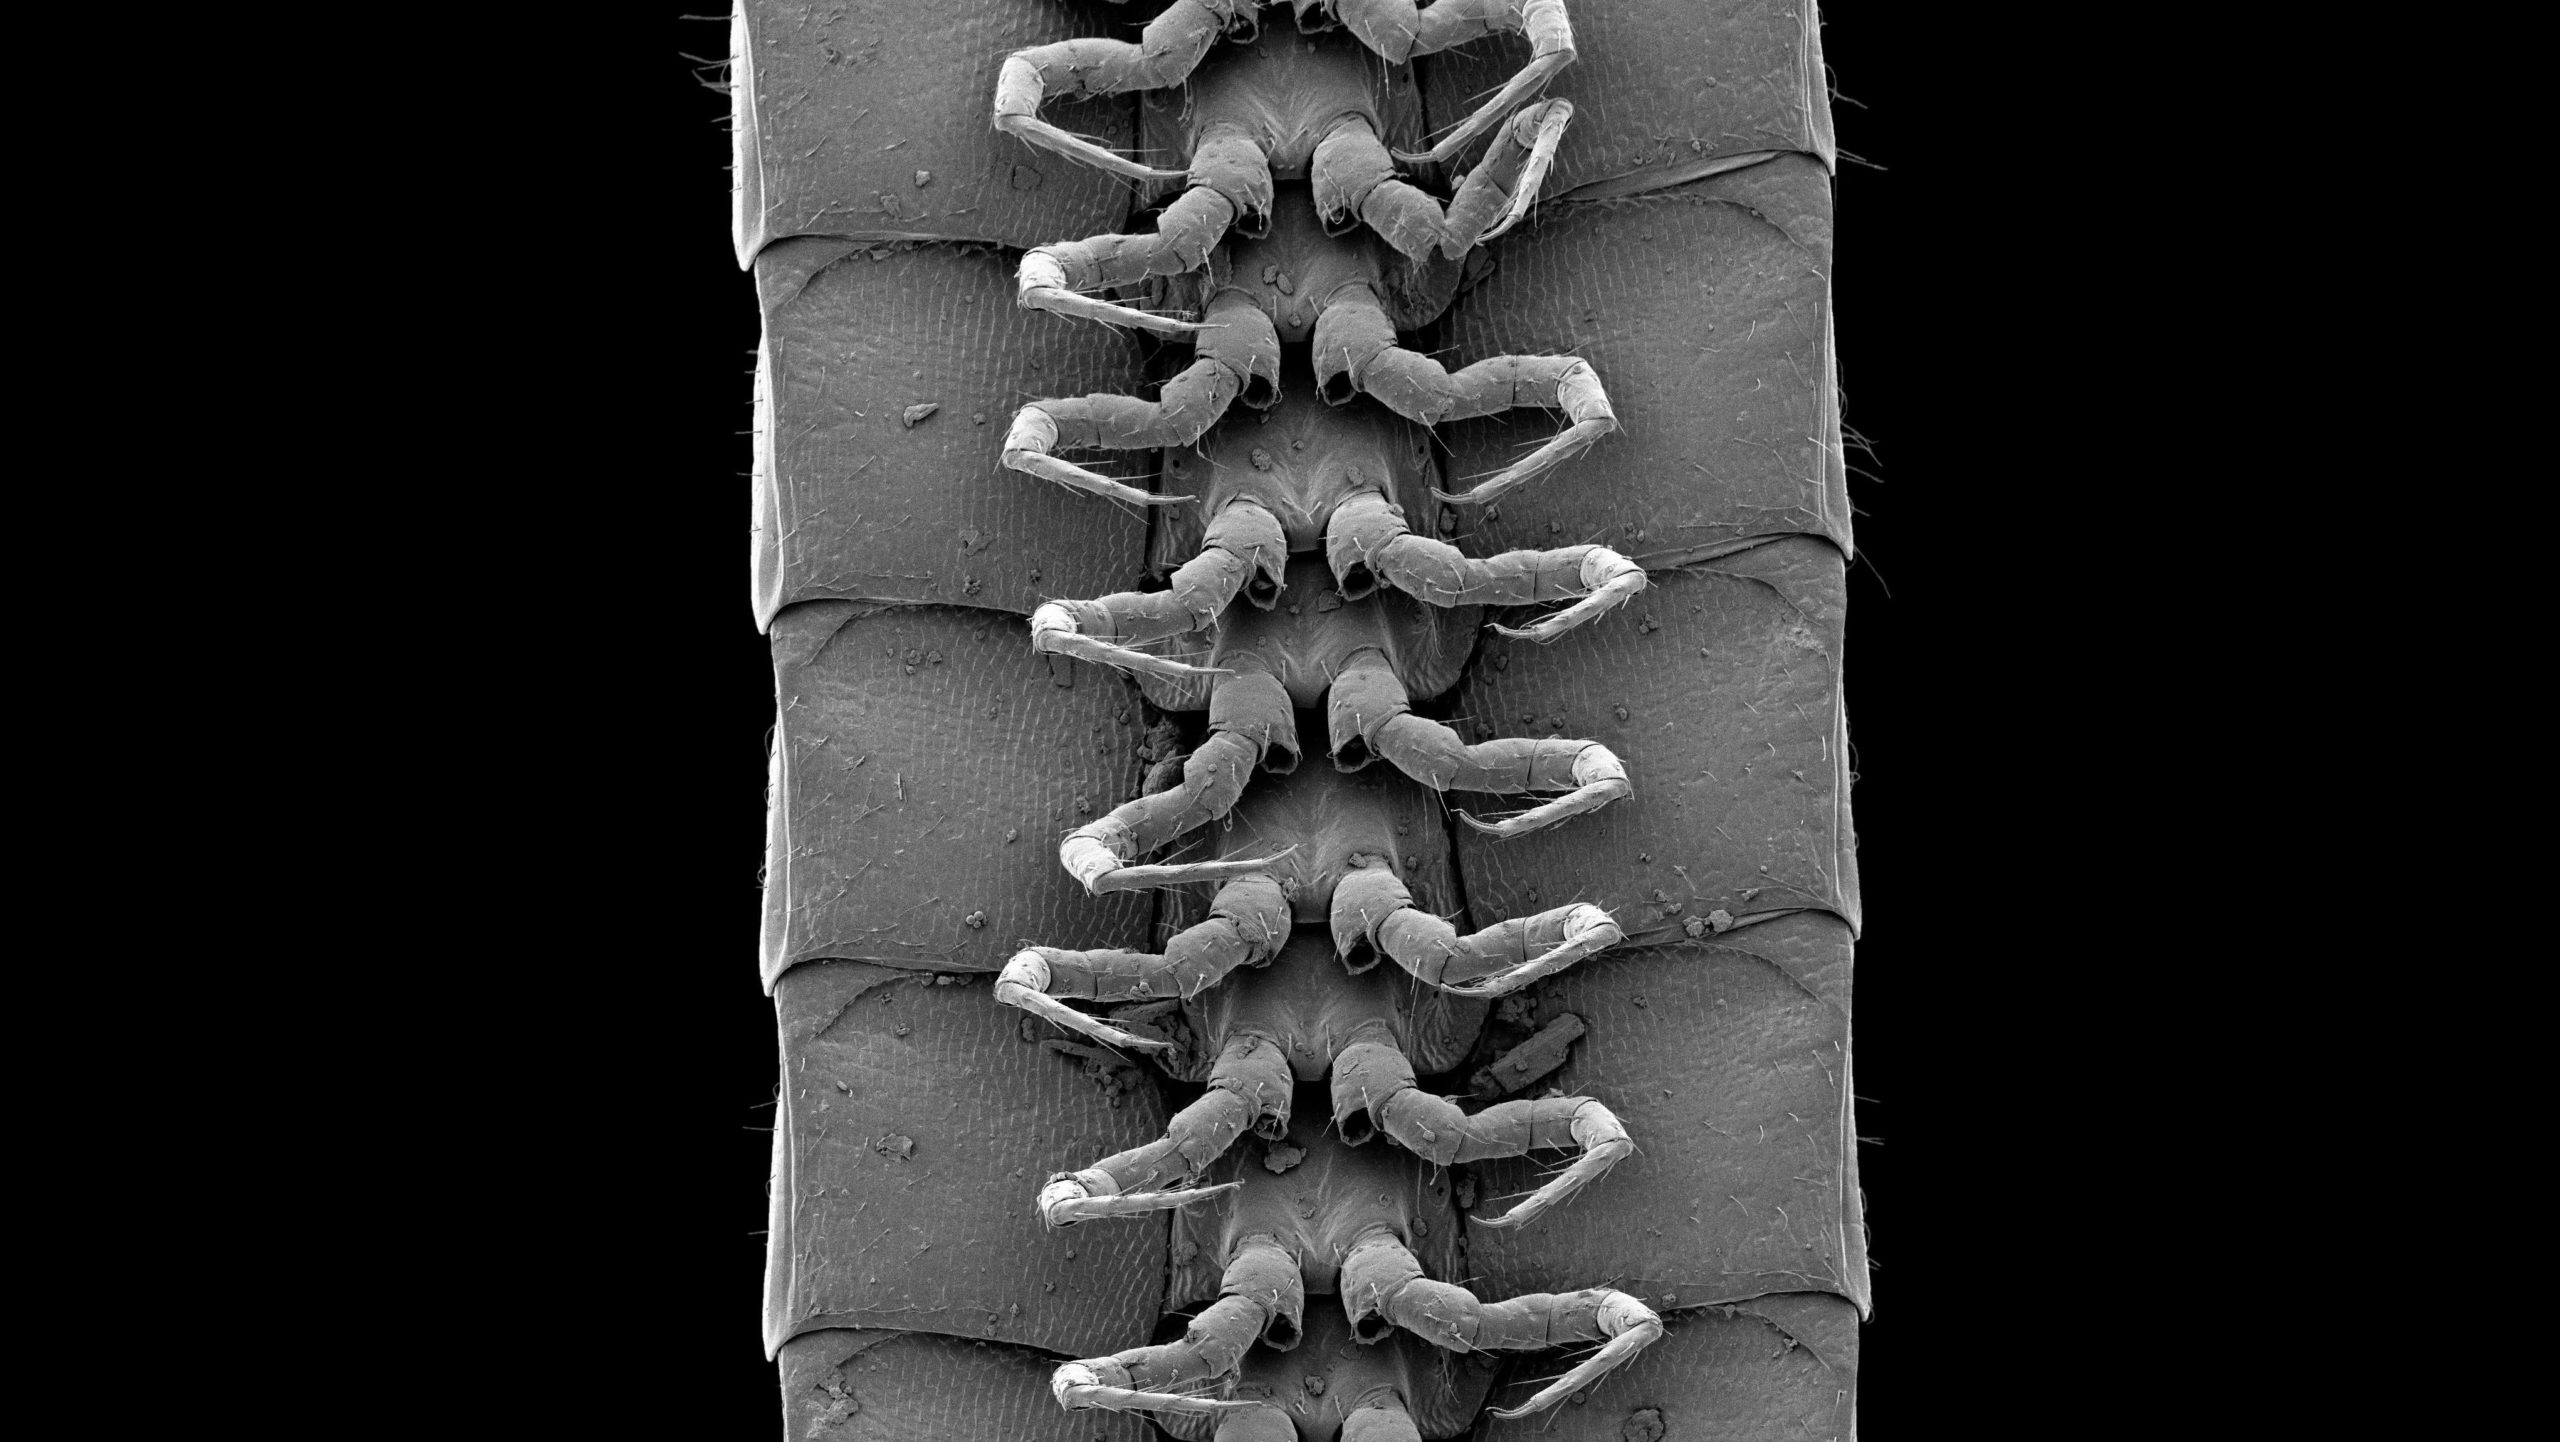 Some of the many legs on the newly discovered millipede. (Image: Marek et al., Scientific Reports 2021)